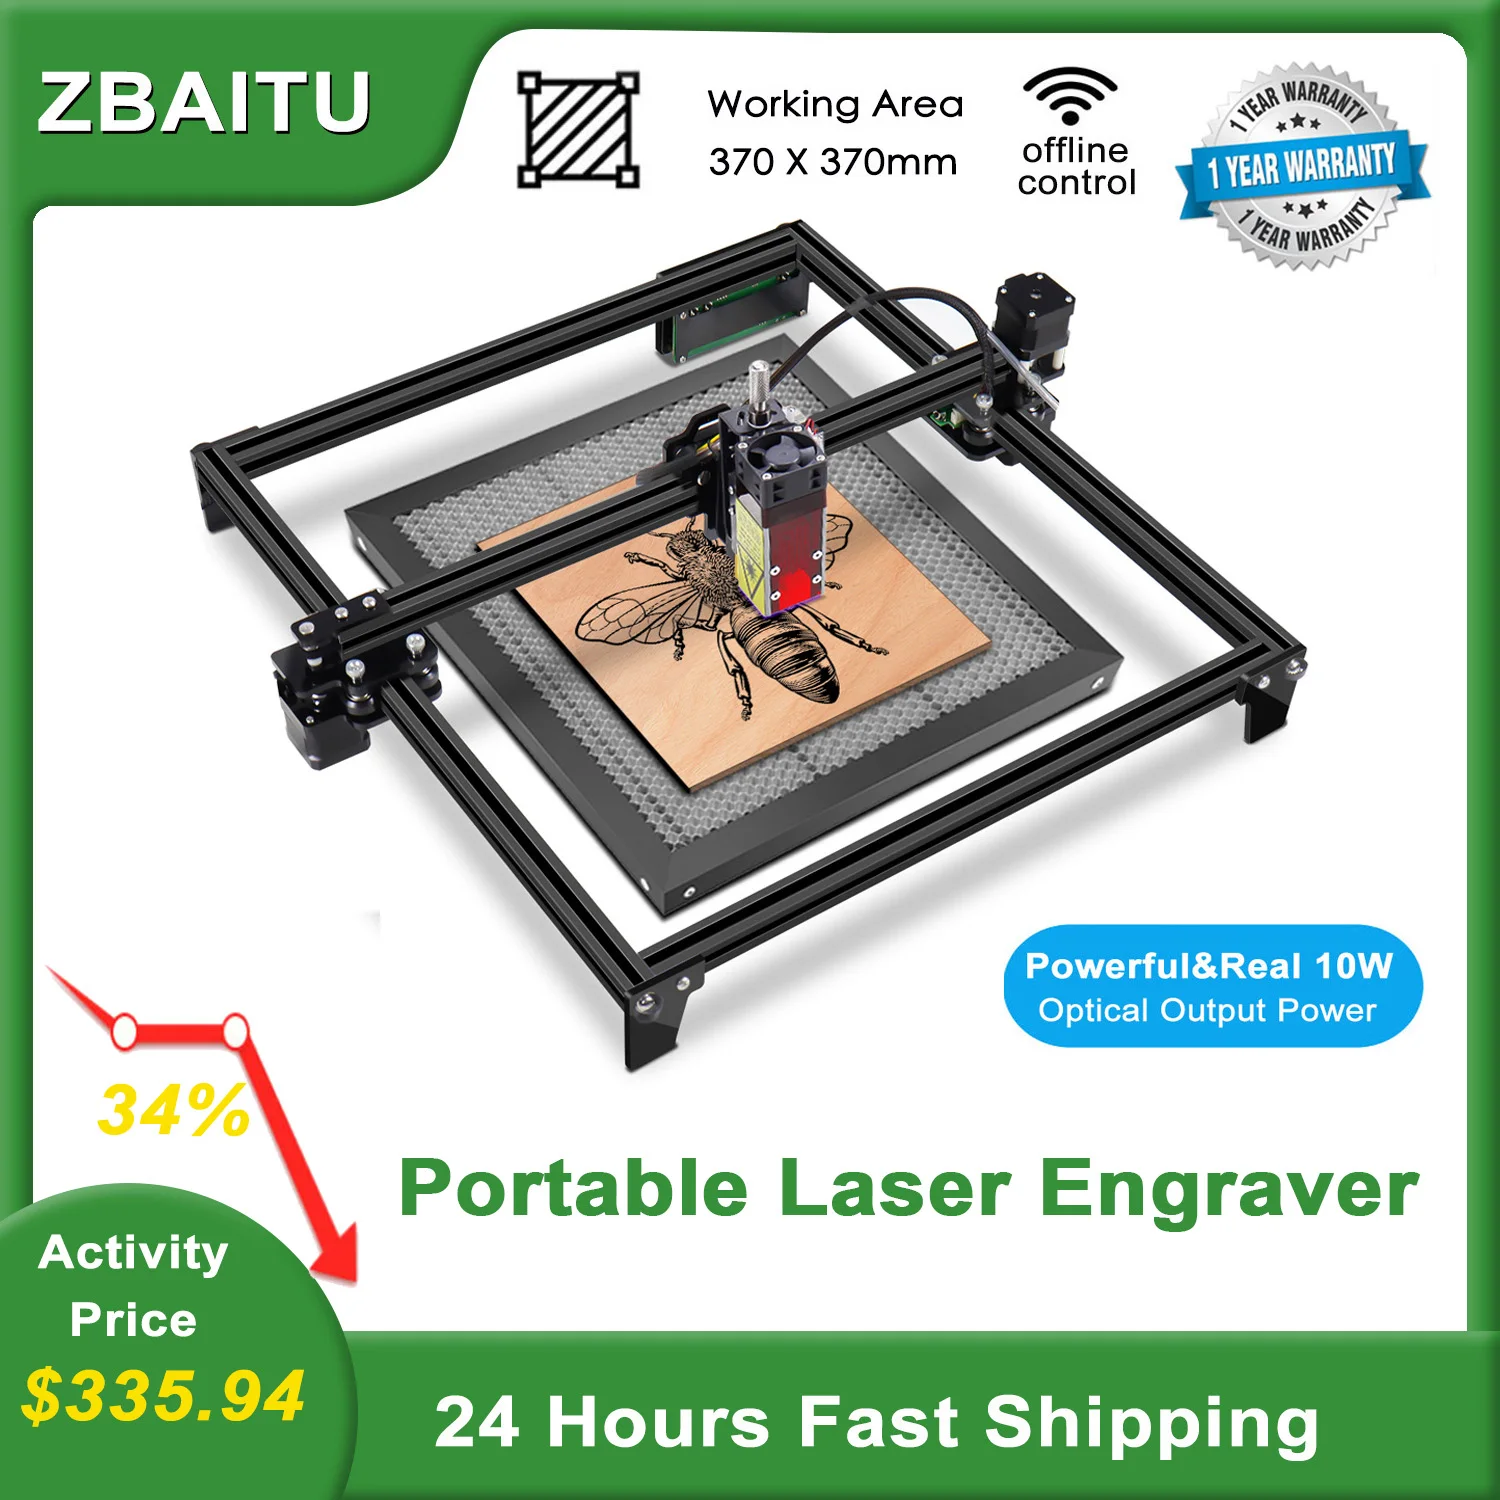 ZBAITU CNC Laser Engraver Cutter Machine One Pass Cutting 8mm Plywood High Precision Wood MDF Stainless Steel Marking Engraving